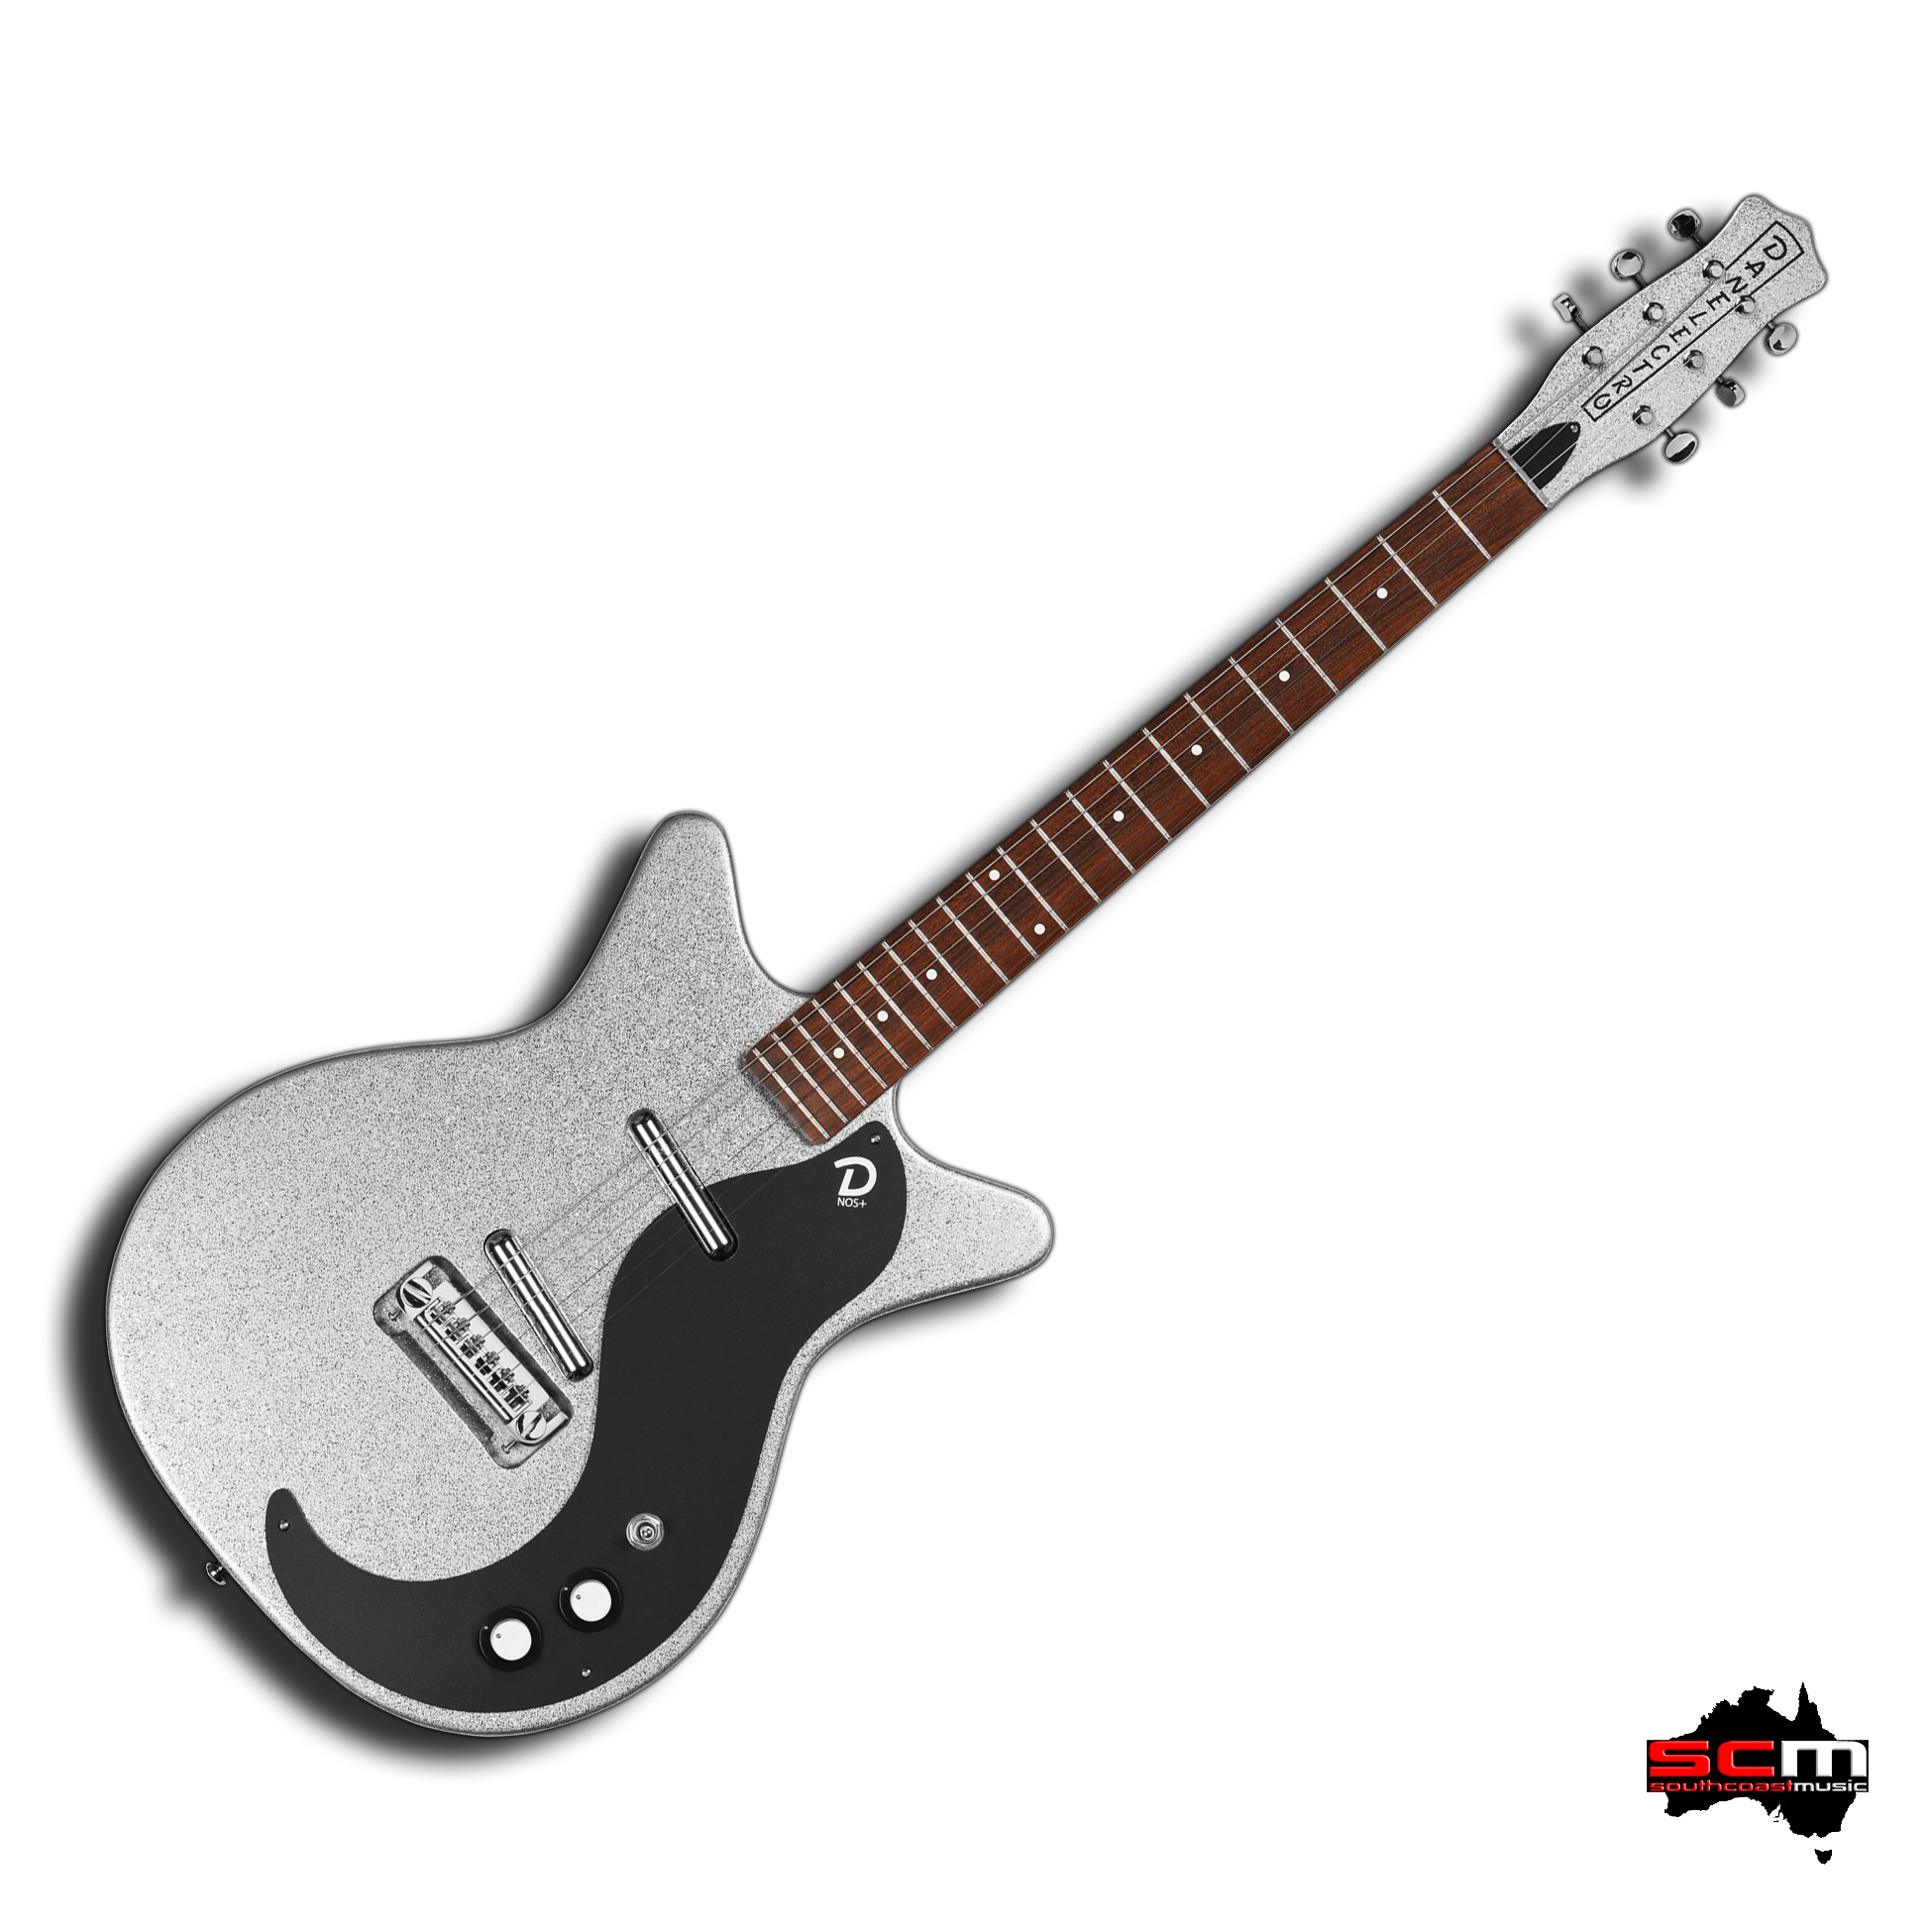 Danelectro 60th Anniversary 59M NOS+ electric guitar Silver Metal Flake finish South Coast Music